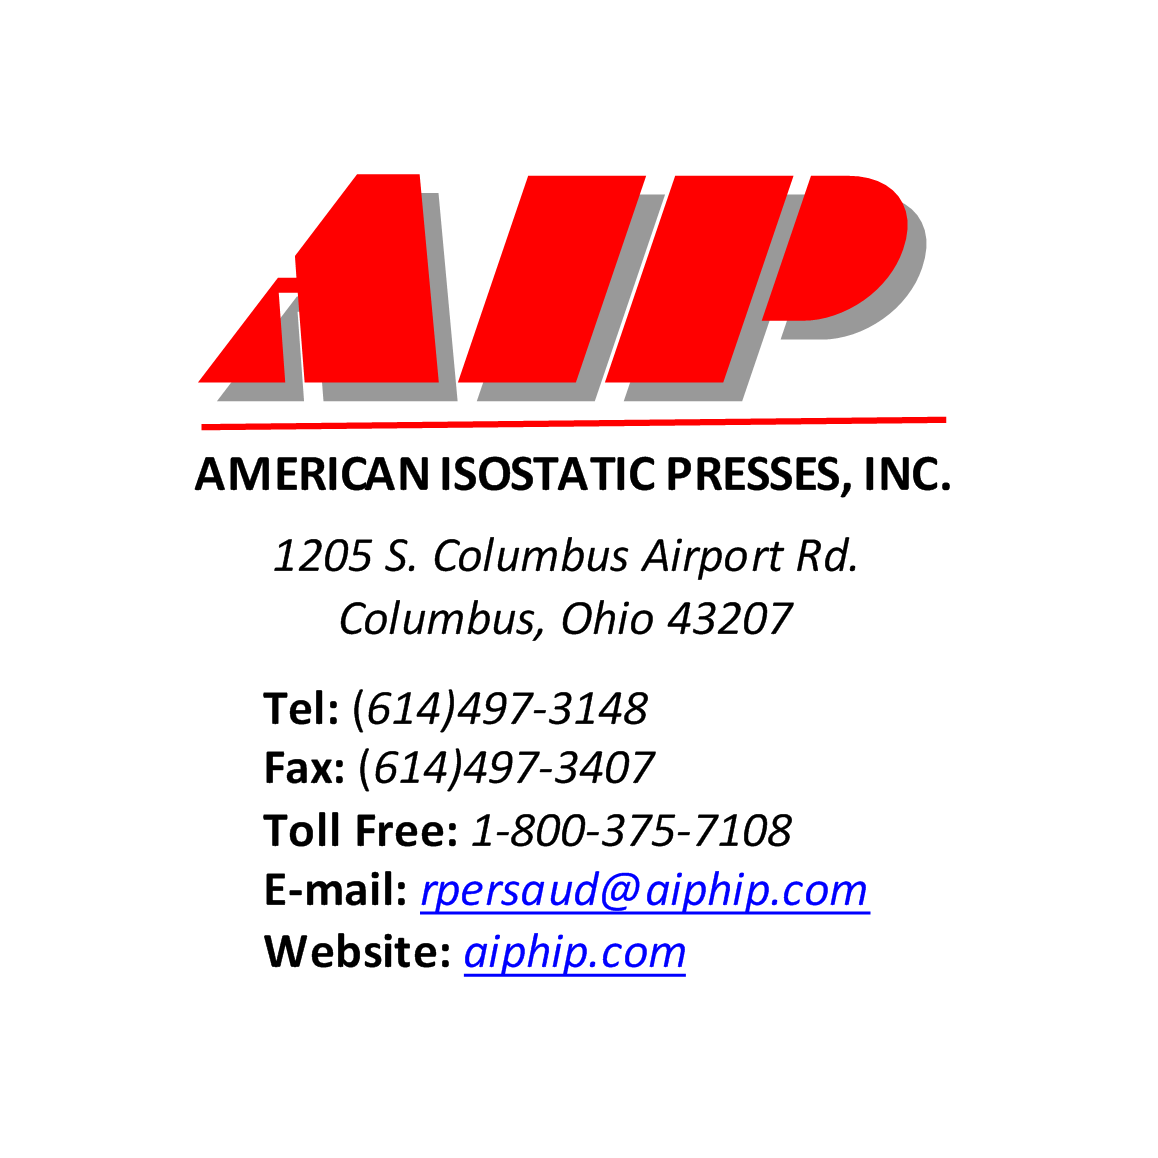 aip-logo-with-contact